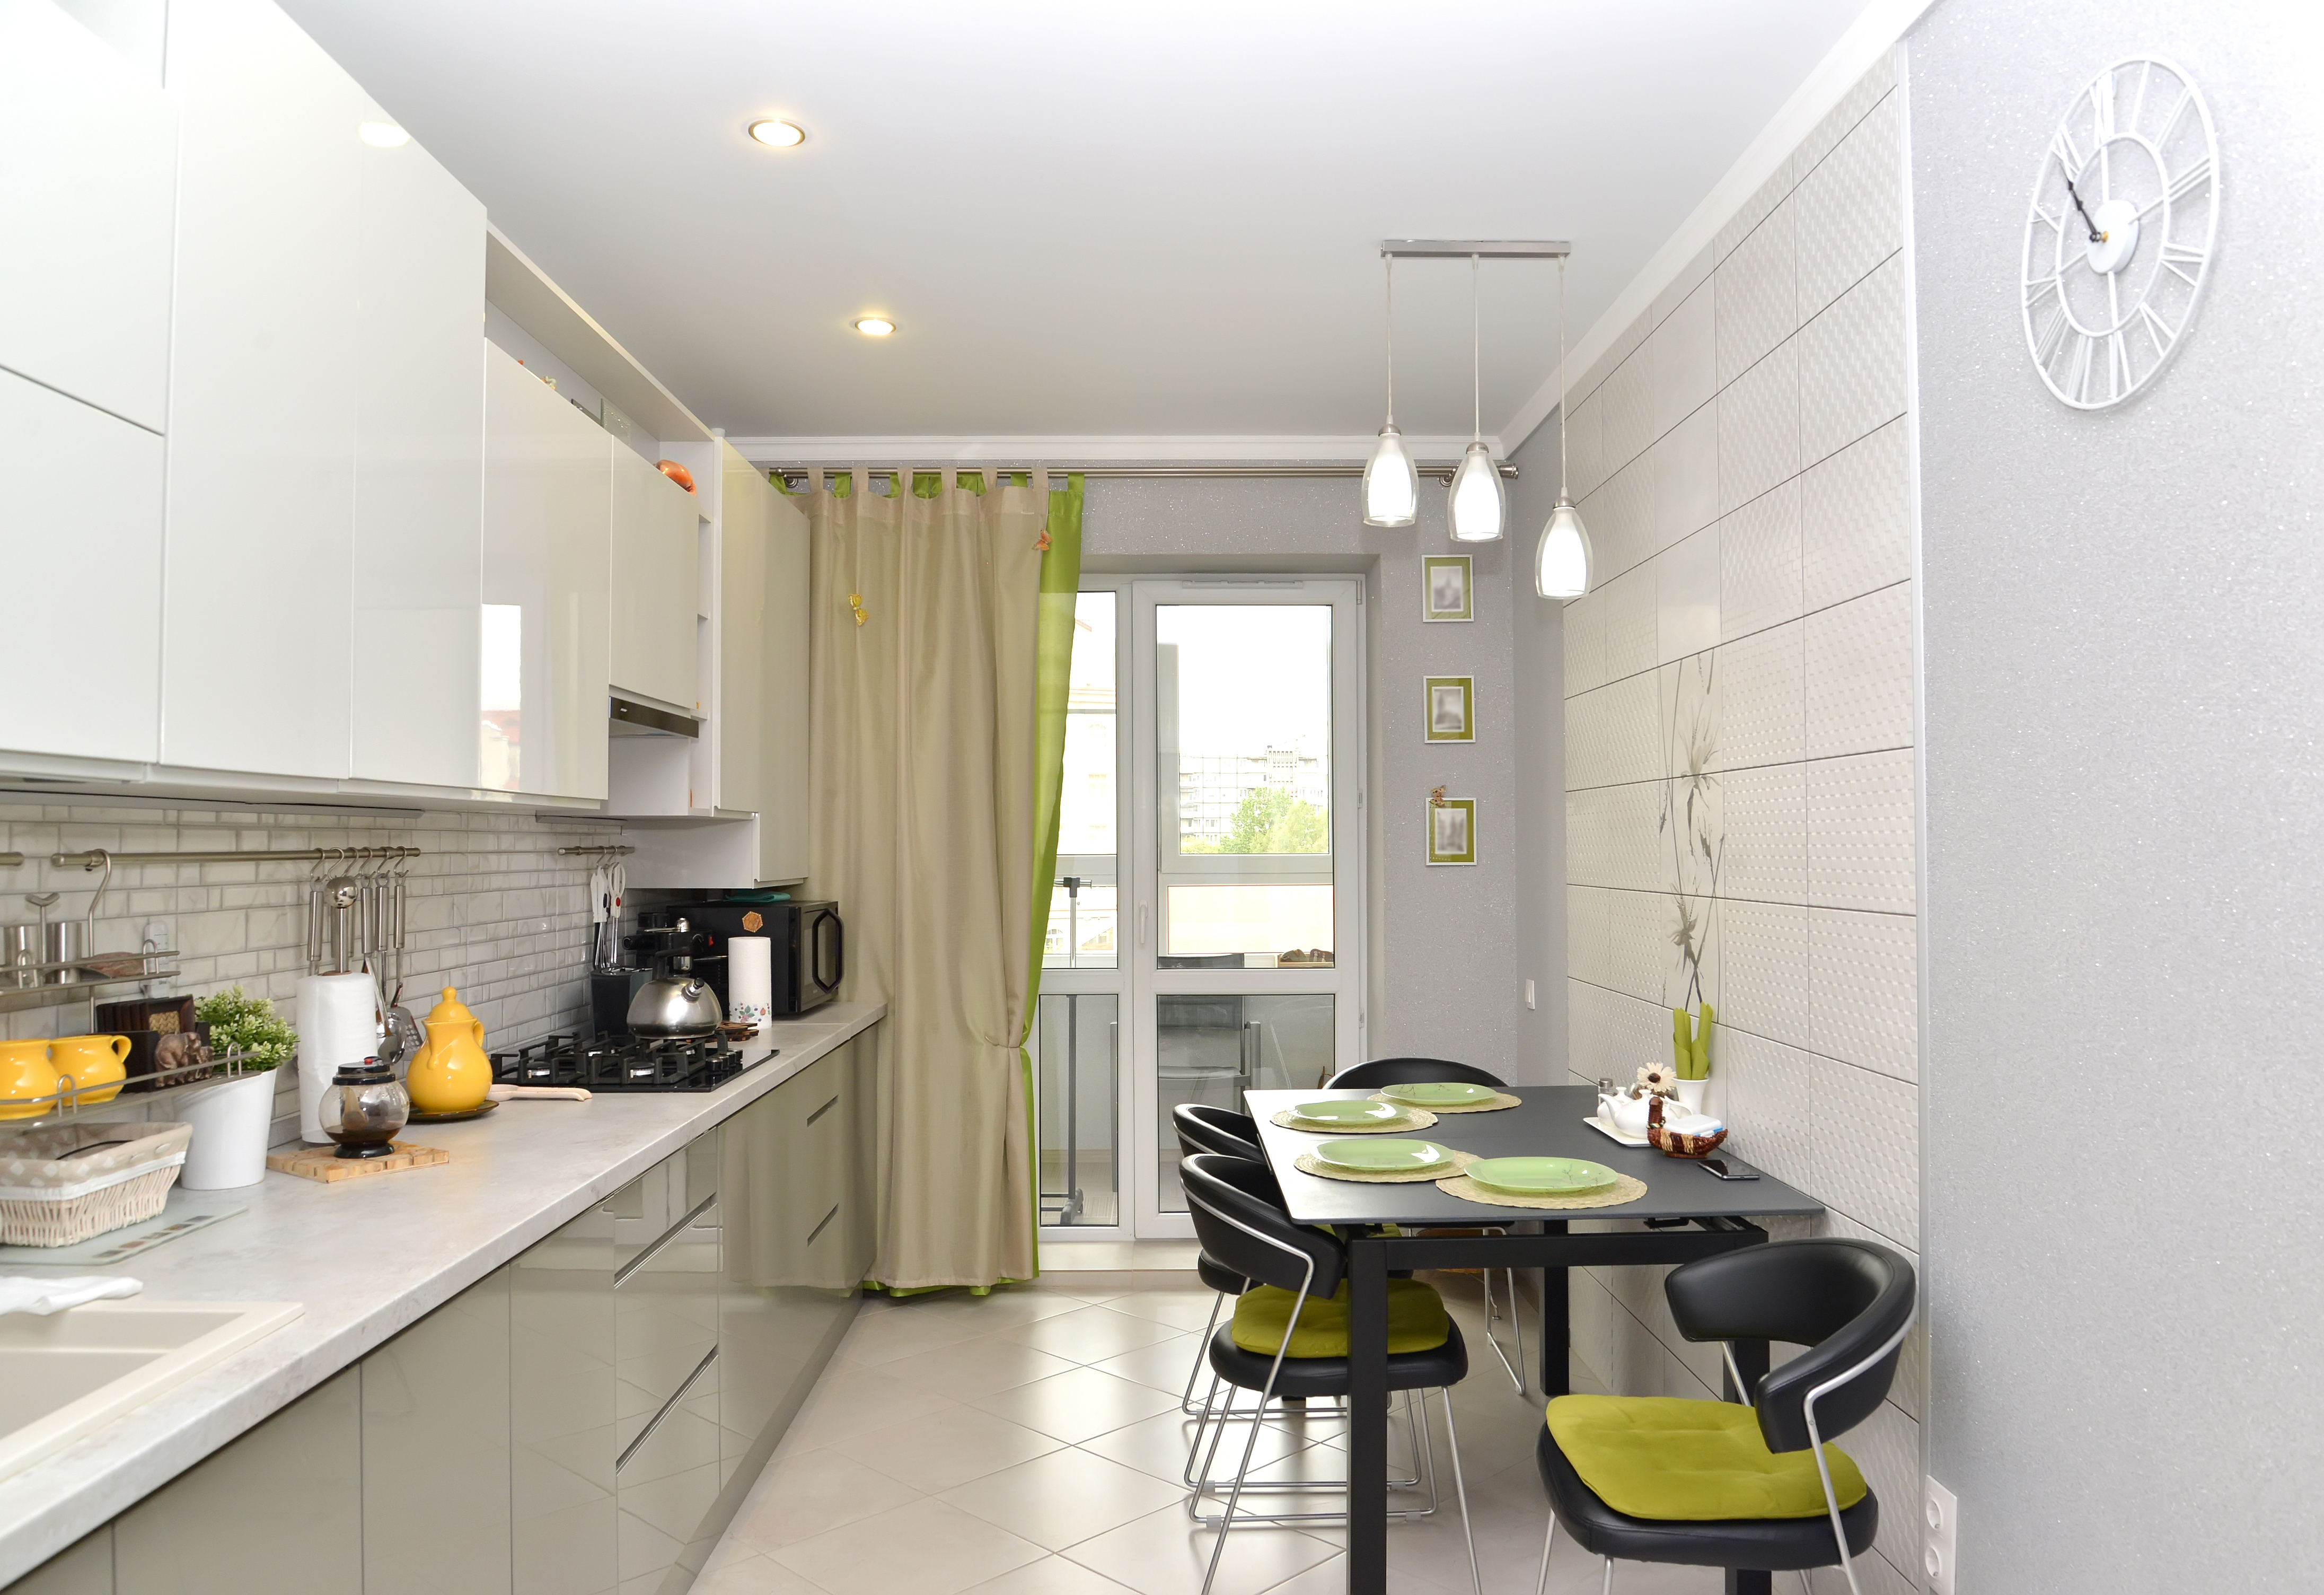 Best home interior designers in Bangalore - Simple Kitchen Design Ideas for your Sweet Home